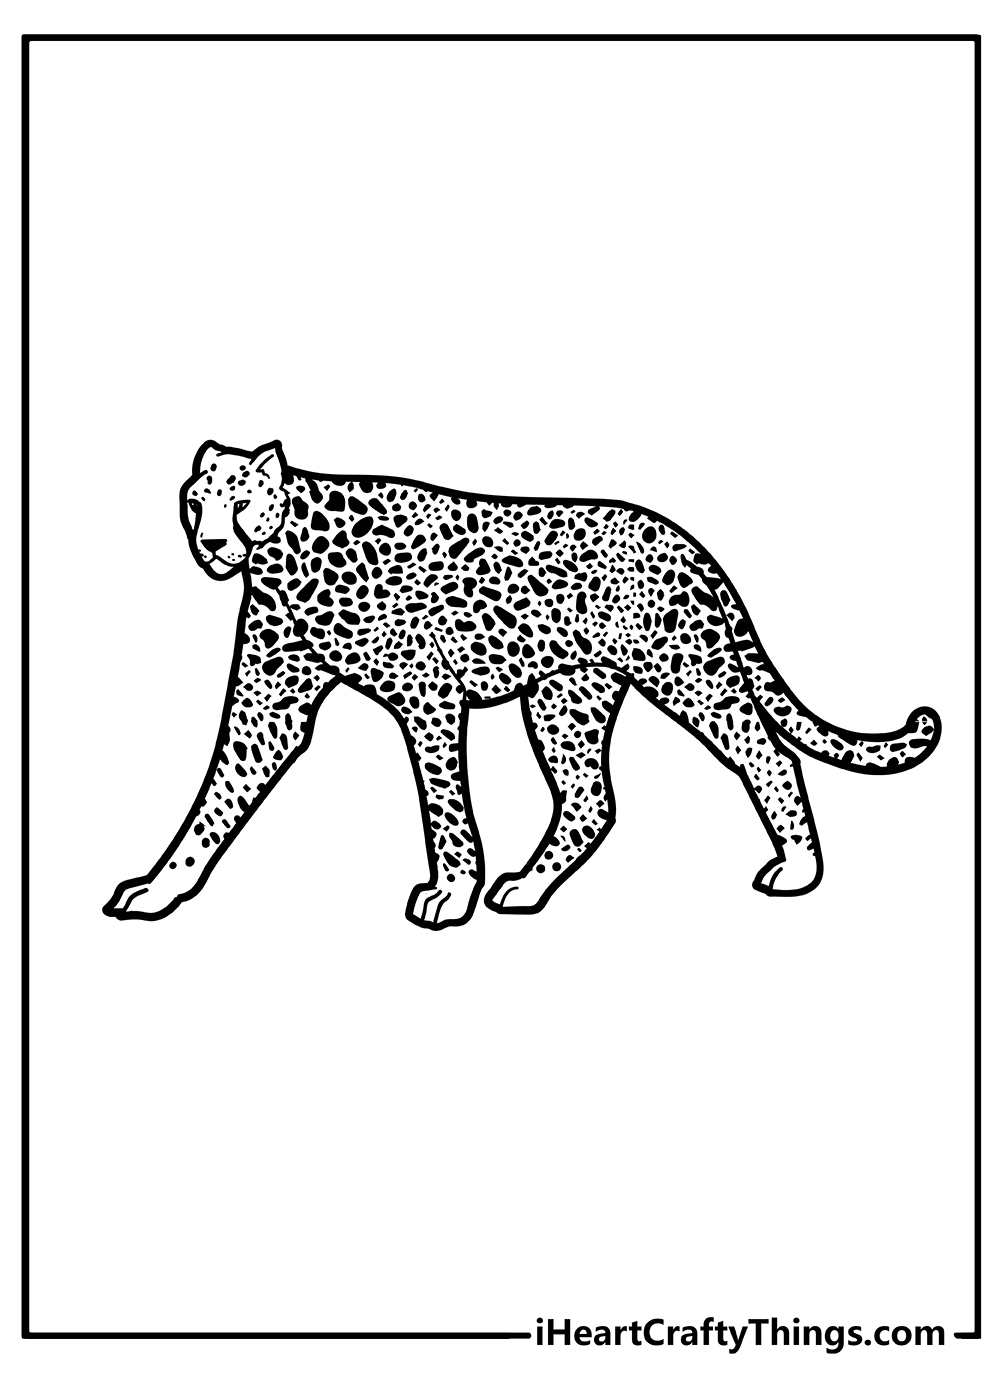 Cheetah Coloring Pages free pdf download